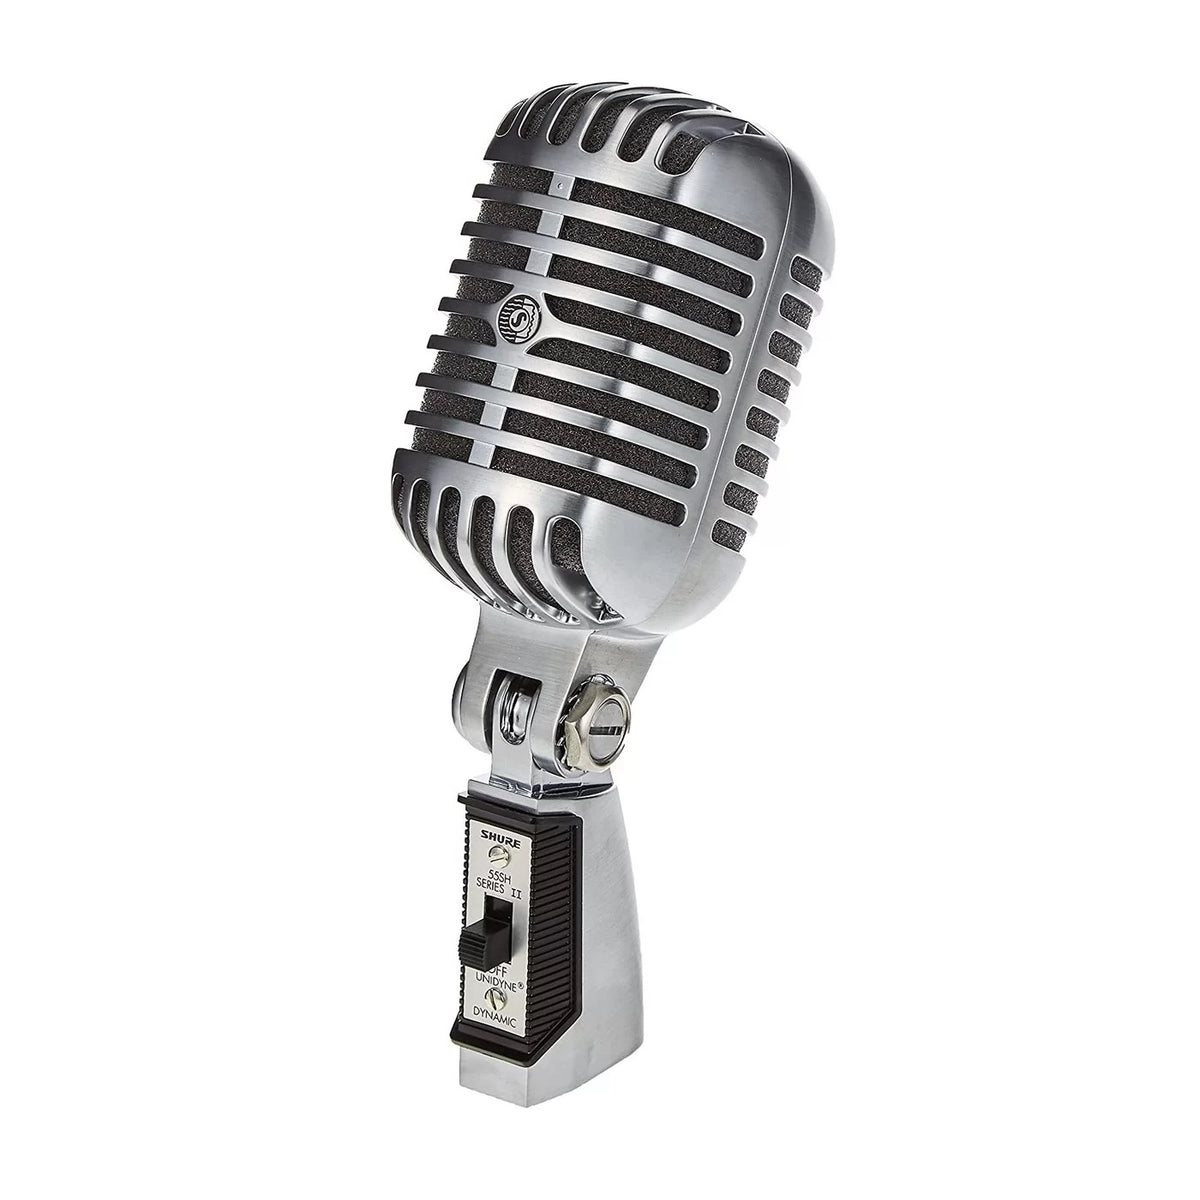 Shure 55SH Series II Iconic Unidyne Vocal Microphone | Professional Audio | Professional Audio, Professional Audio. Professional Audio: Dynamic Microphone, Professional Audio. Professional Audio: Microphones, Professional Audio. Professional Audio: Wired Microphones | Shure